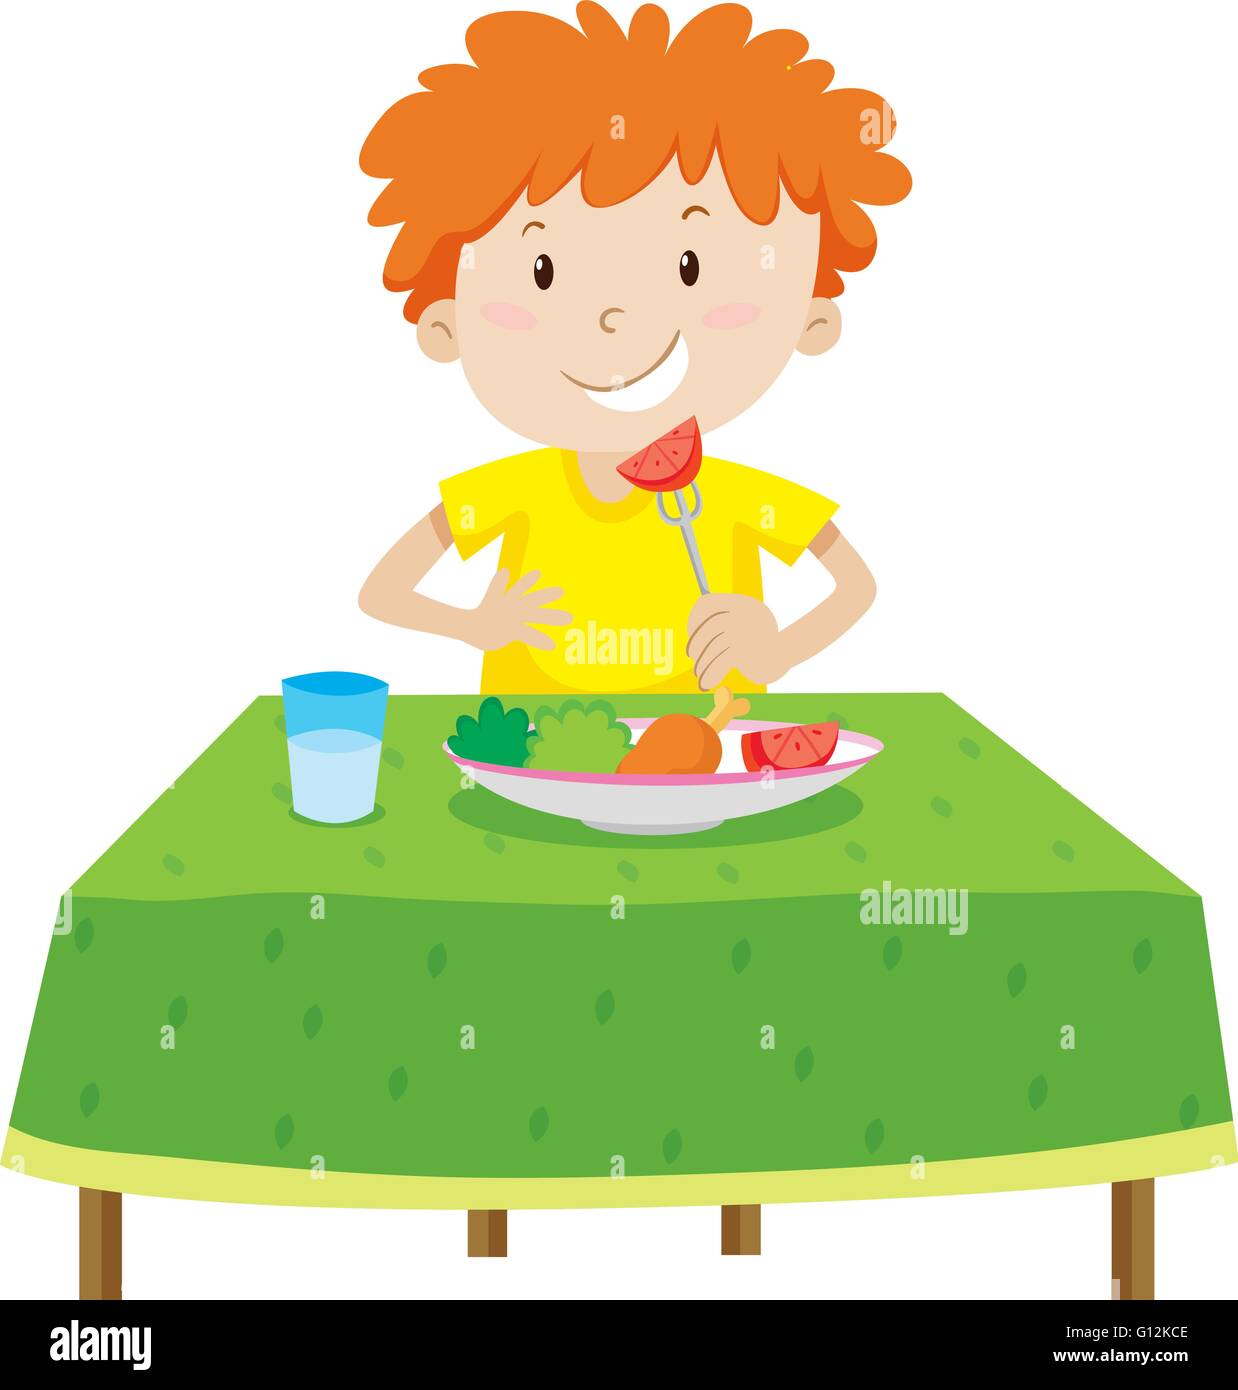 Little boy eating on the table illustration Stock Vector